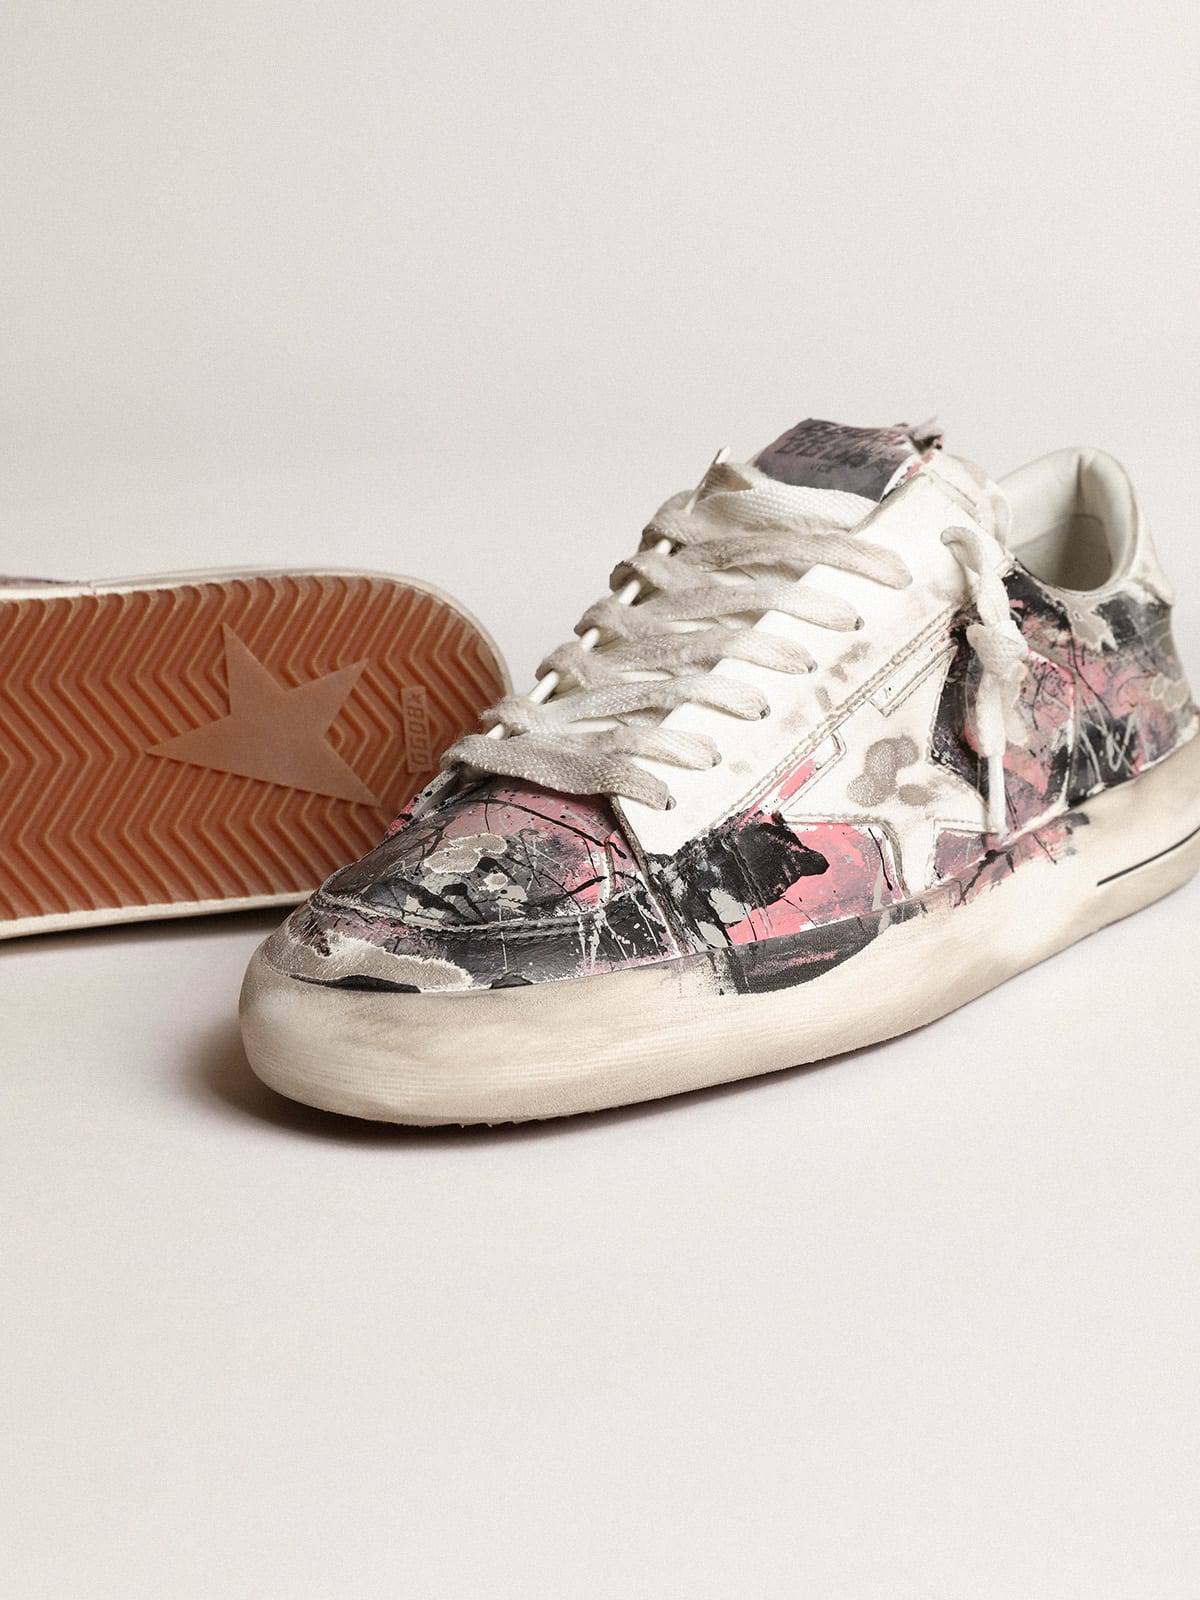 Golden Goose - Men’s Stardan LAB in leather with all-over multicolored paint splatters in 